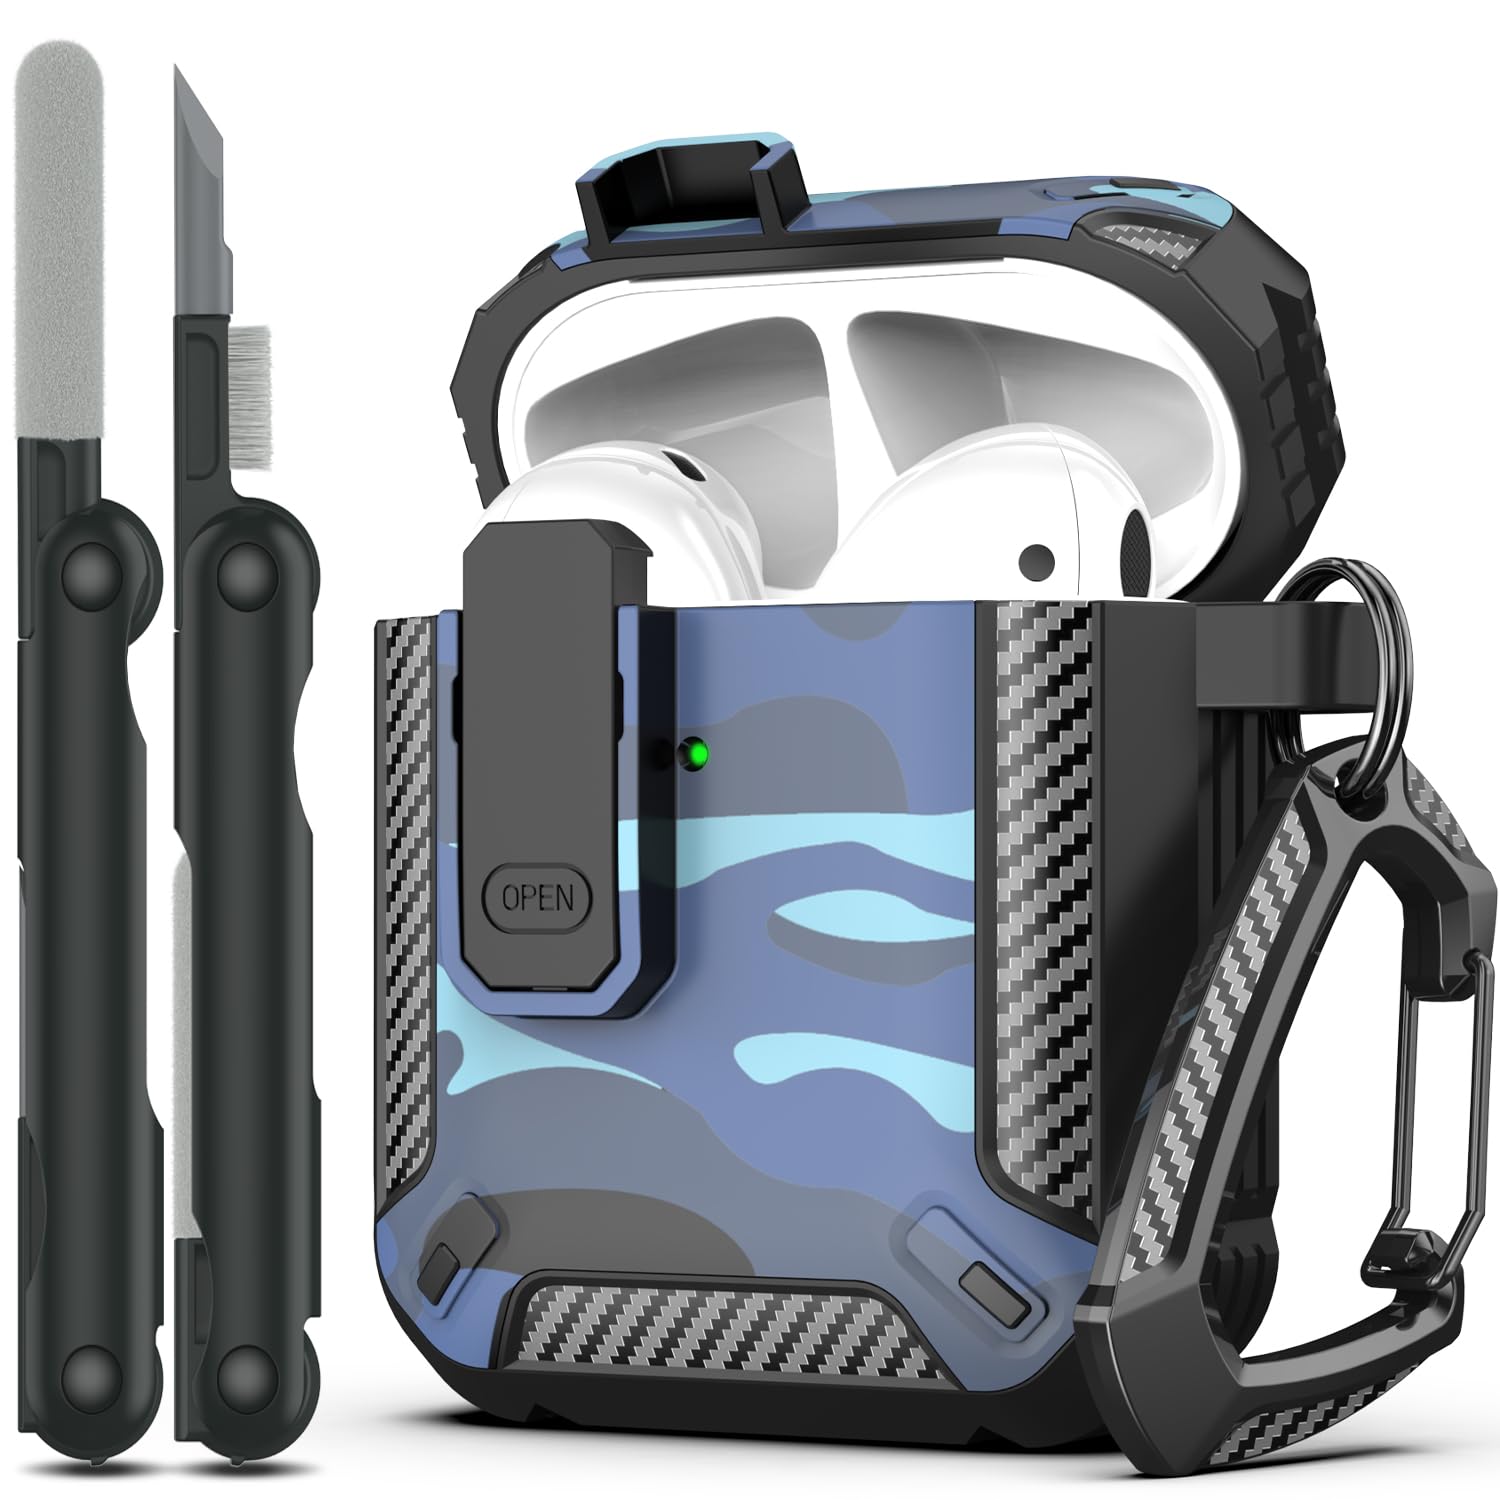 RFUNGUANGO AirPods 2nd Generation Case Cover with Cleaner Kit, Military Hard Shell Protective Armor with Lock for AirPod Gen 1&2 Charging Case, Front LED Visible,Blue Camouflage - Caps Fitted